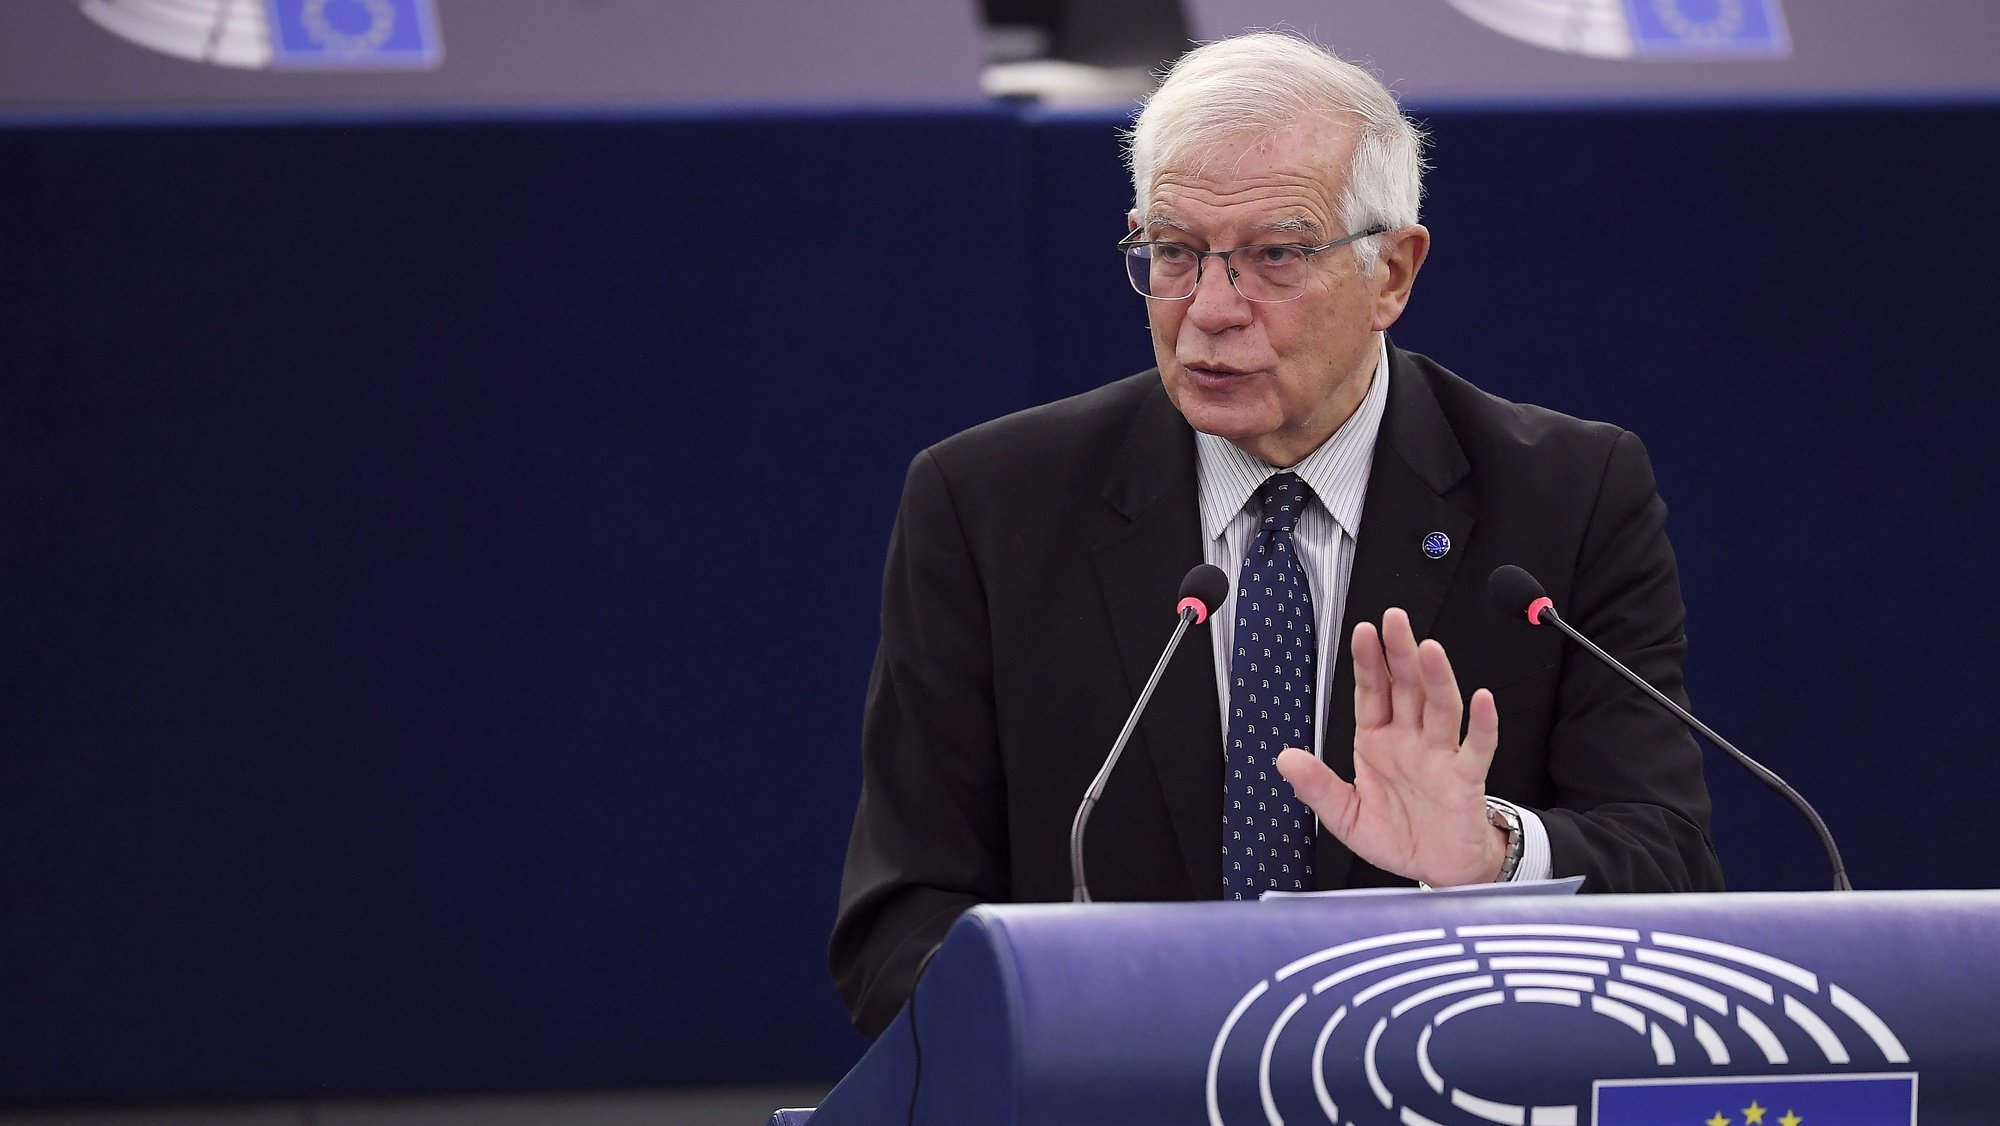 epa09506548 European Union High Representative for Foreign Affairs and Security Policy Josep Borrell delivers a speech during a debate on the future of EU-US relations as part of a plenary session at the European Parliament in Strasbourg, France, 05 October 2021.  EPA/FREDERICK FLORIN / POOL